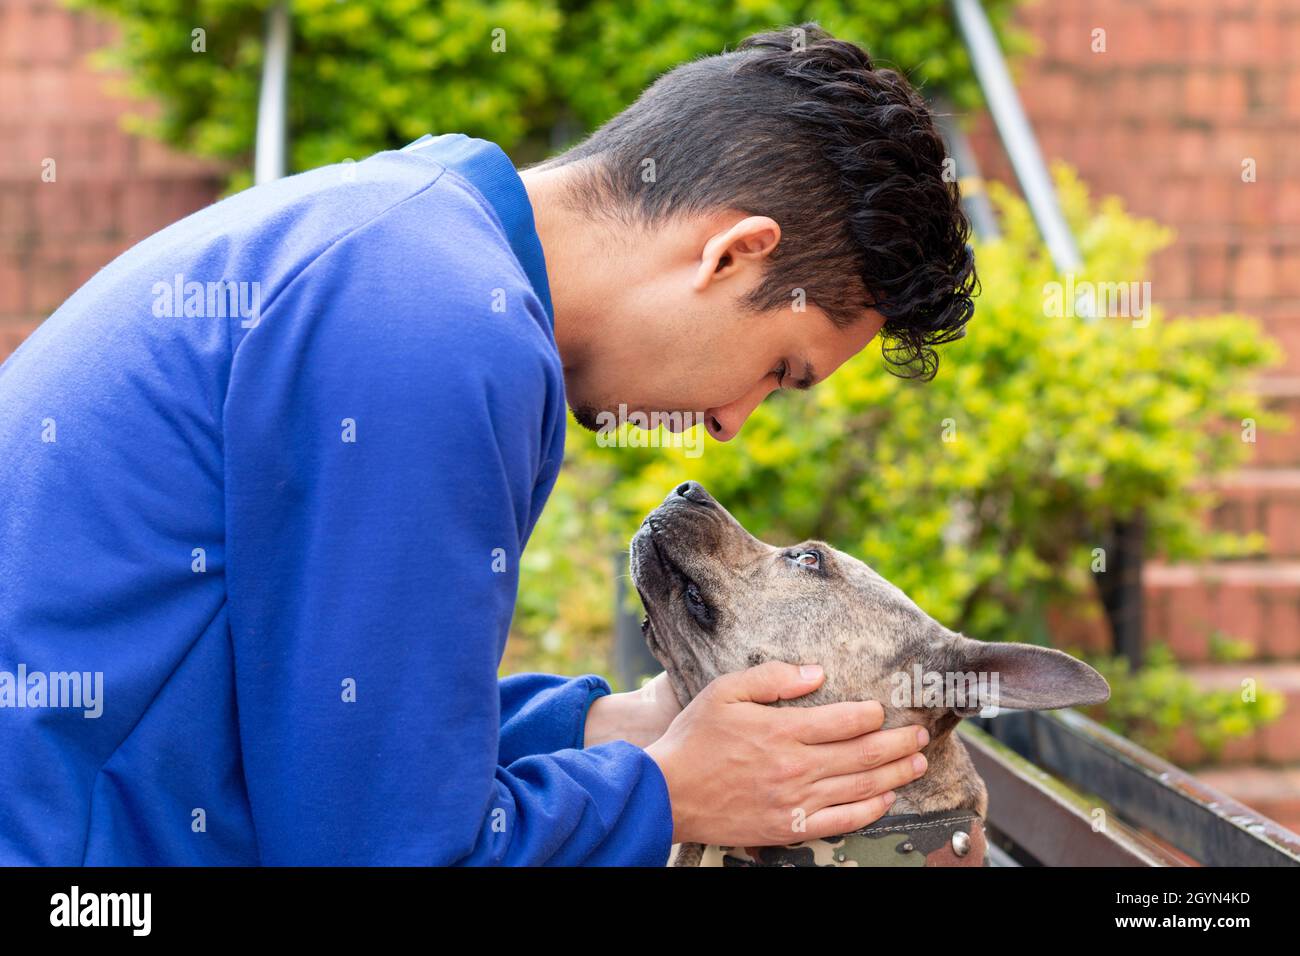 Man kissing his cute pitbull dog. Pitbull that is not dangerous. Dog in brindle color. Horizontal photo. Stock Photo